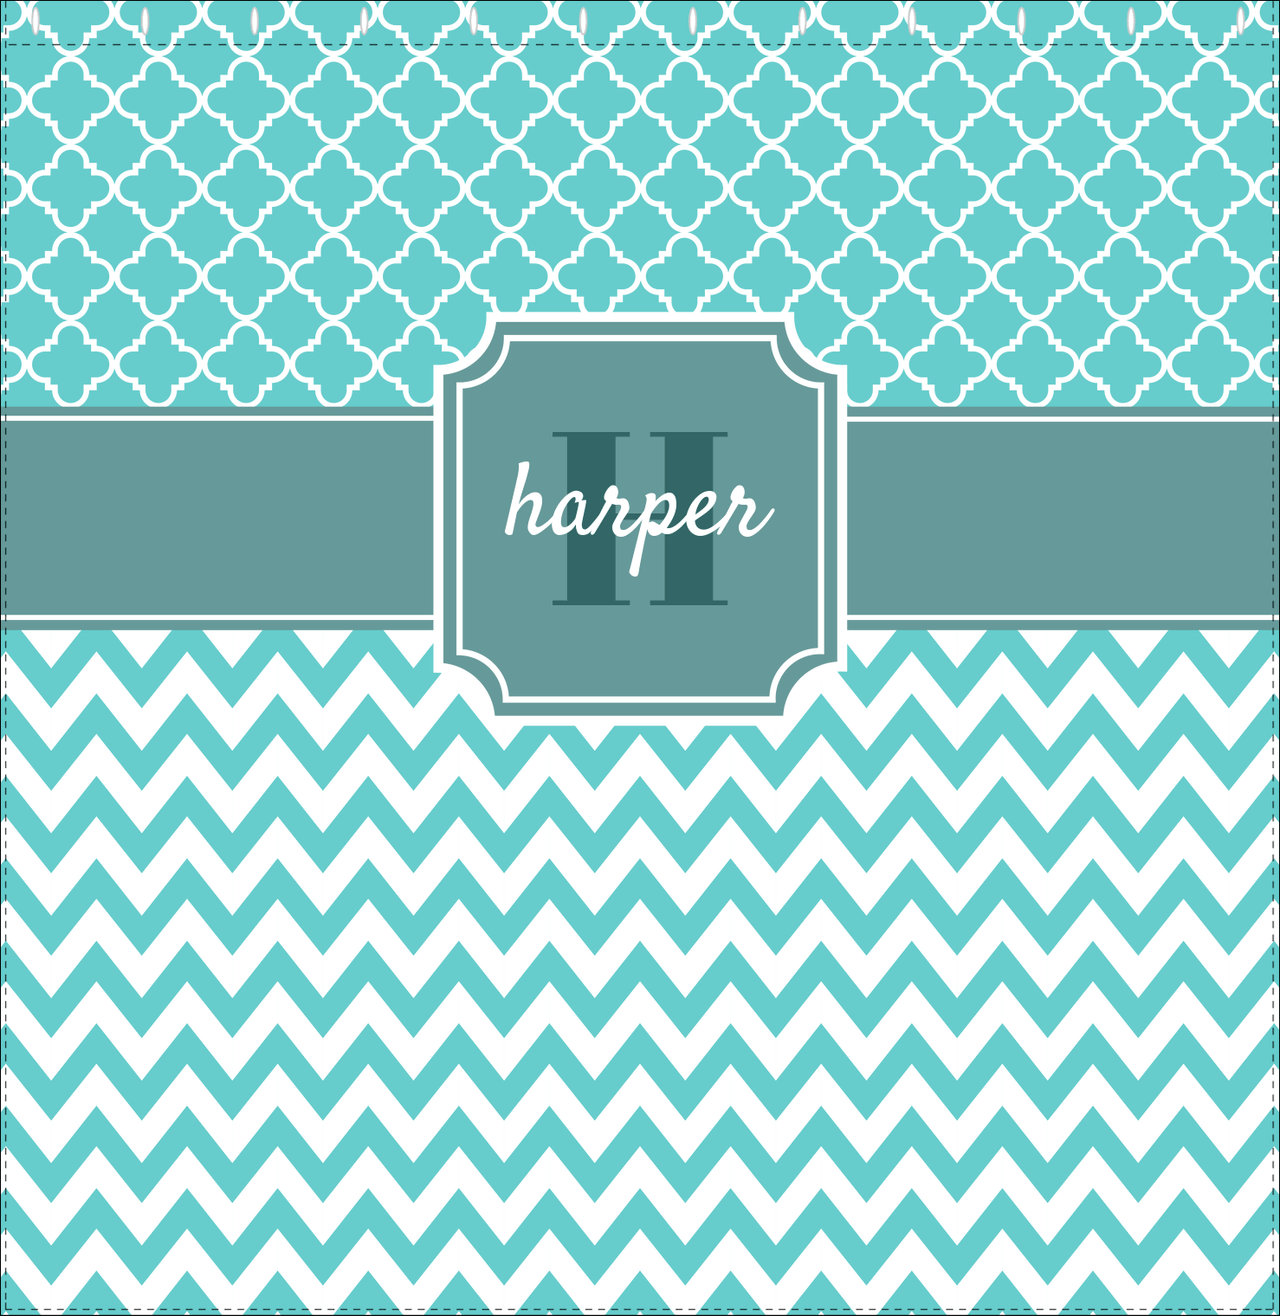 Personalized Quatrefoil and Chevron I Shower Curtain - Teal and White - Stamp Nameplate - Decorate View